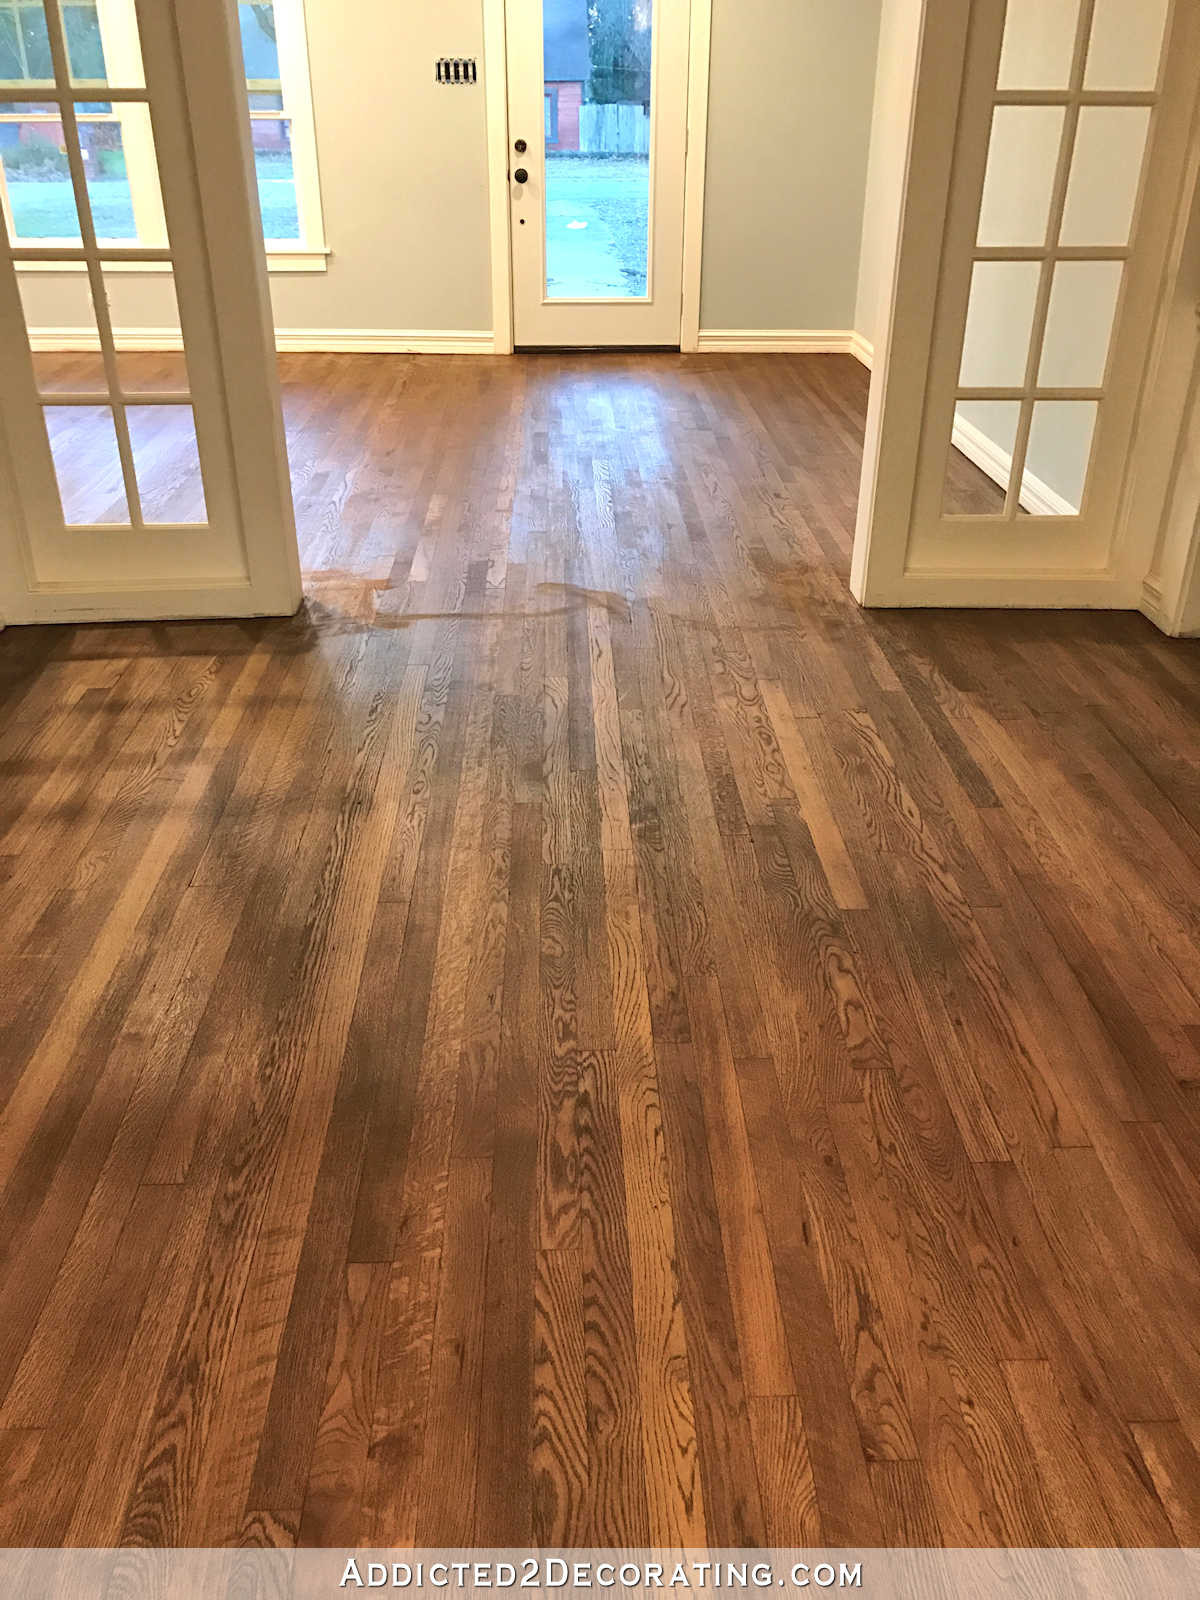 13 Fashionable Cost Per Square Foot to Refinish Hardwood Floors 2024 free download cost per square foot to refinish hardwood floors of how much to refinish hardwood floors adventures in staining my red intended for how much to refinish hardwood floors adventures in stainin